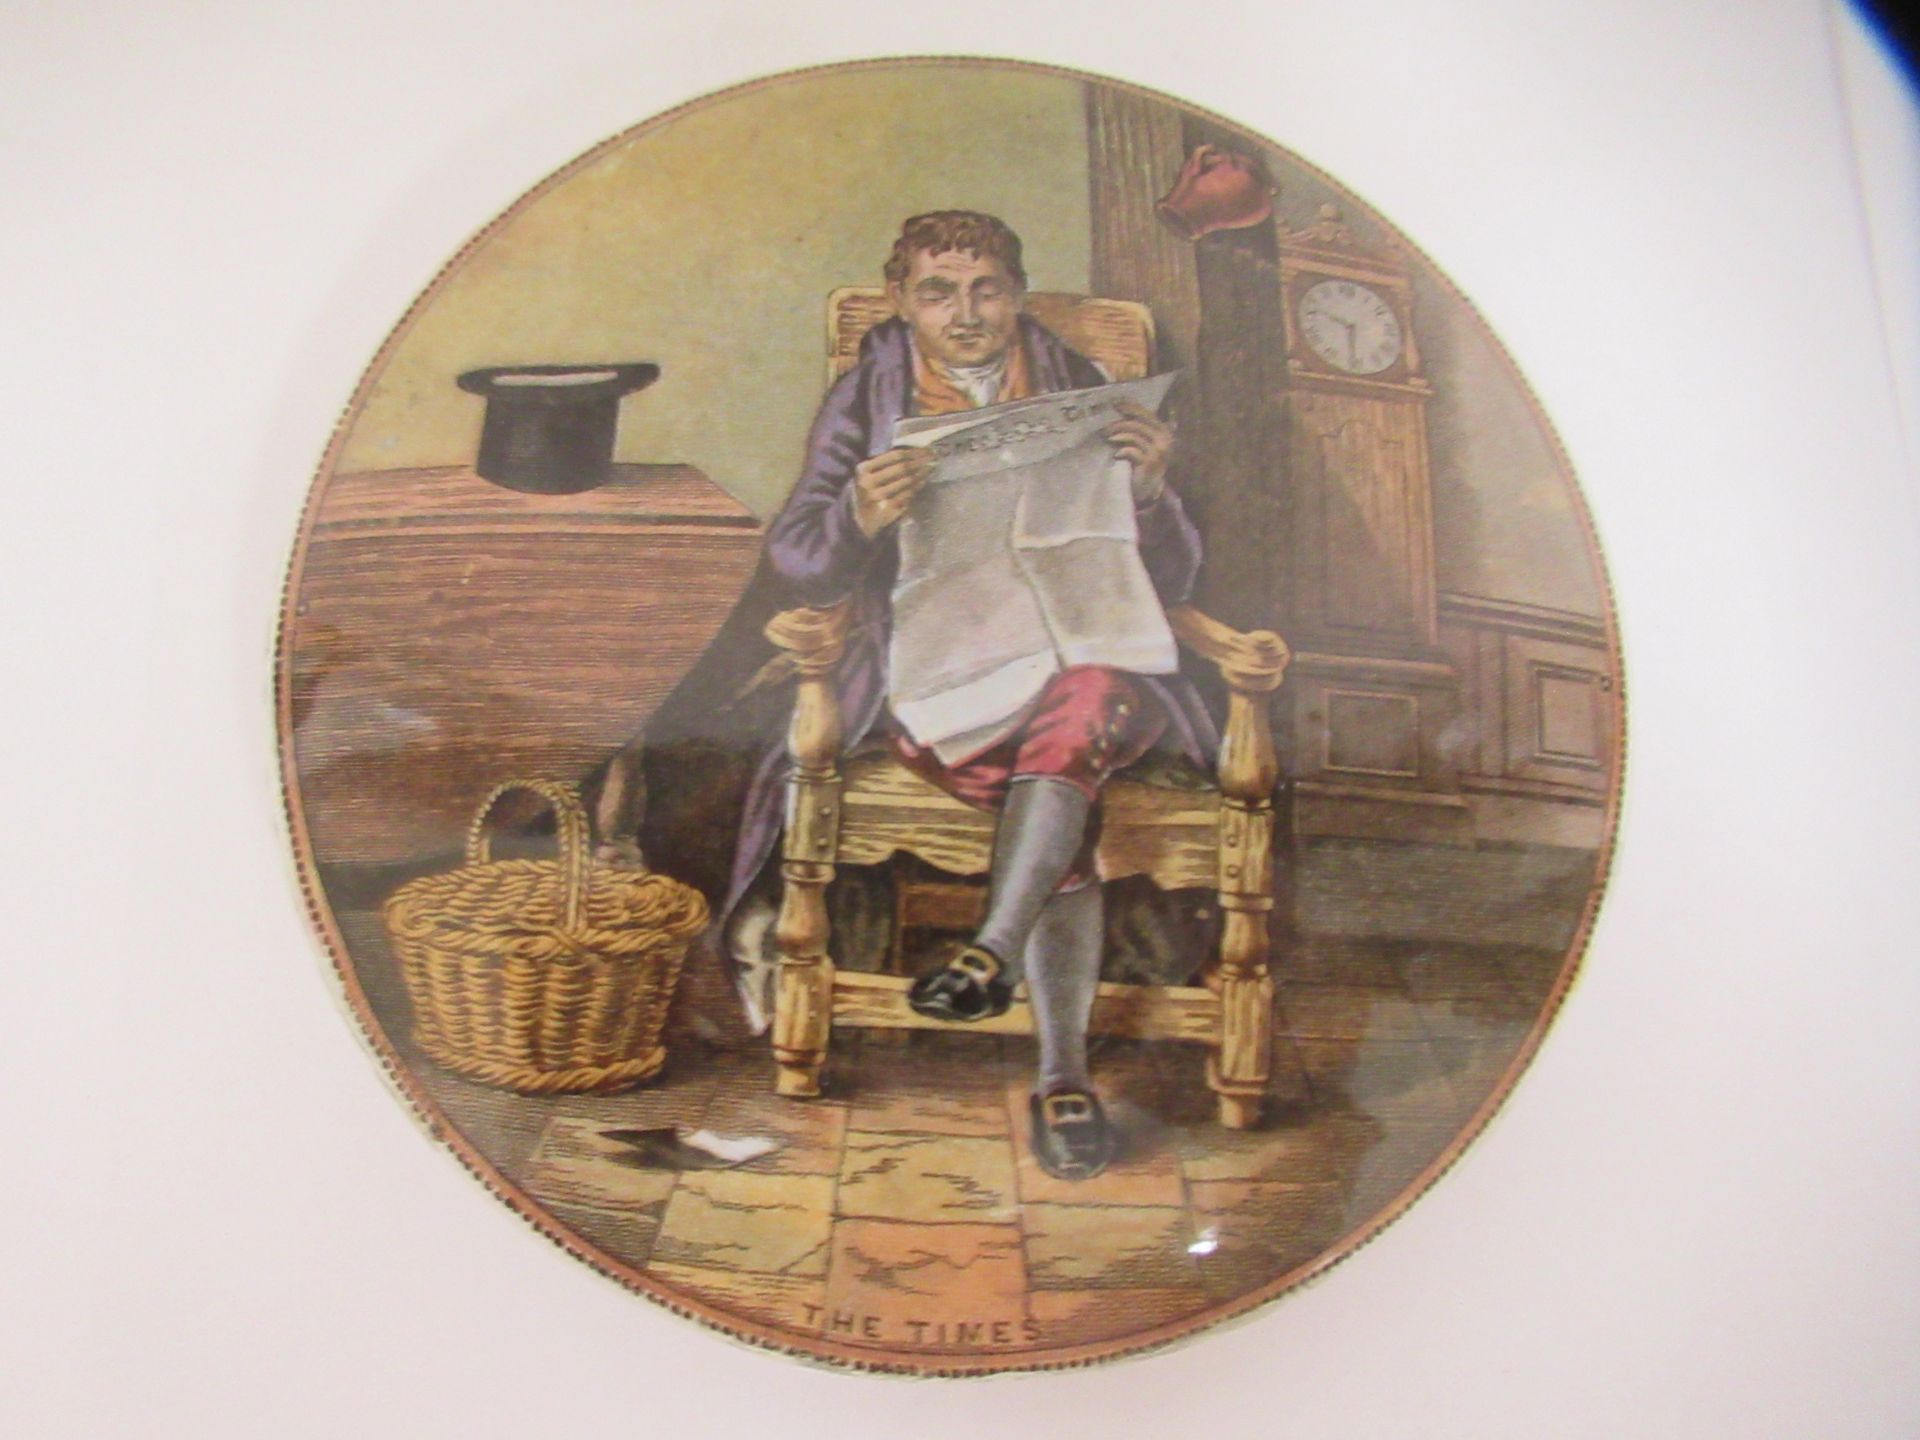 6x Prattware ceramic lids including 'Royal Harbour Ramsgate', 'Uncle Toby', and 'The Times' - Image 12 of 28